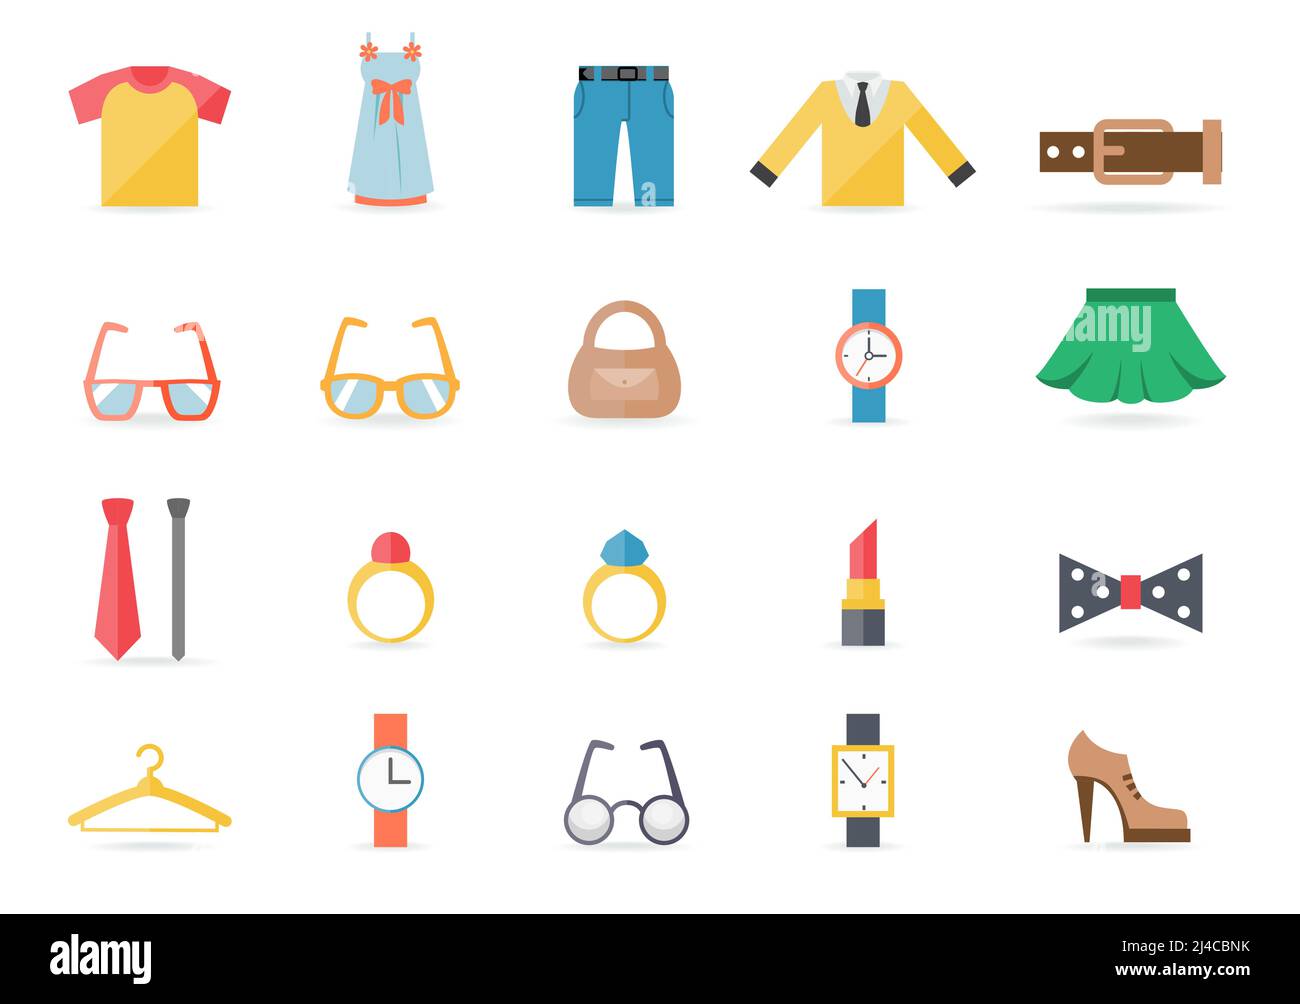 Various Clothing and Accessory Themed Graphic Icons on White Background Stock Vector